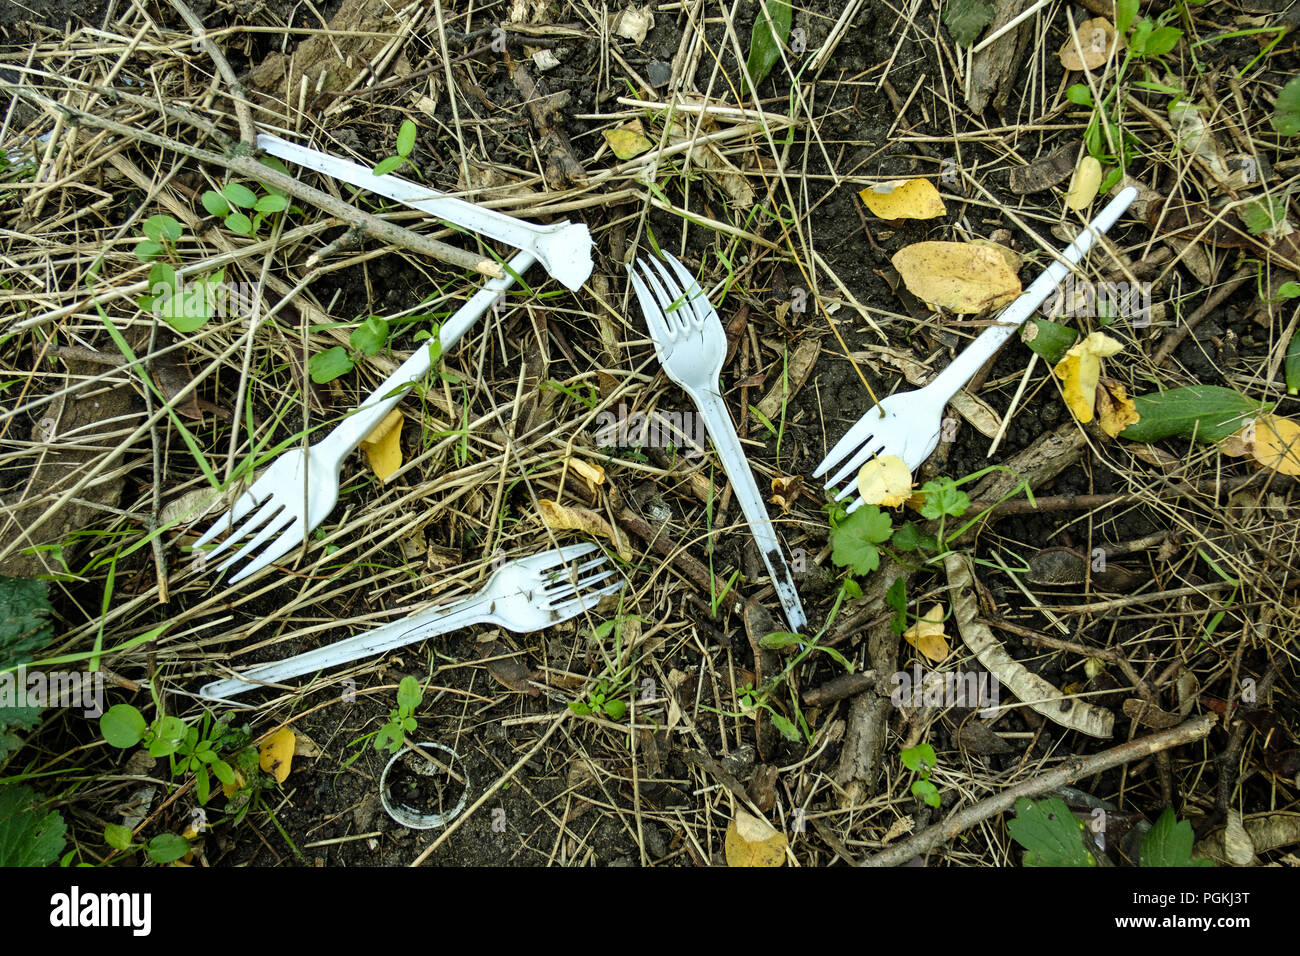 Plastic garbage on nature grows grass. Plastic forks.Plastic tableware. Stock Photo